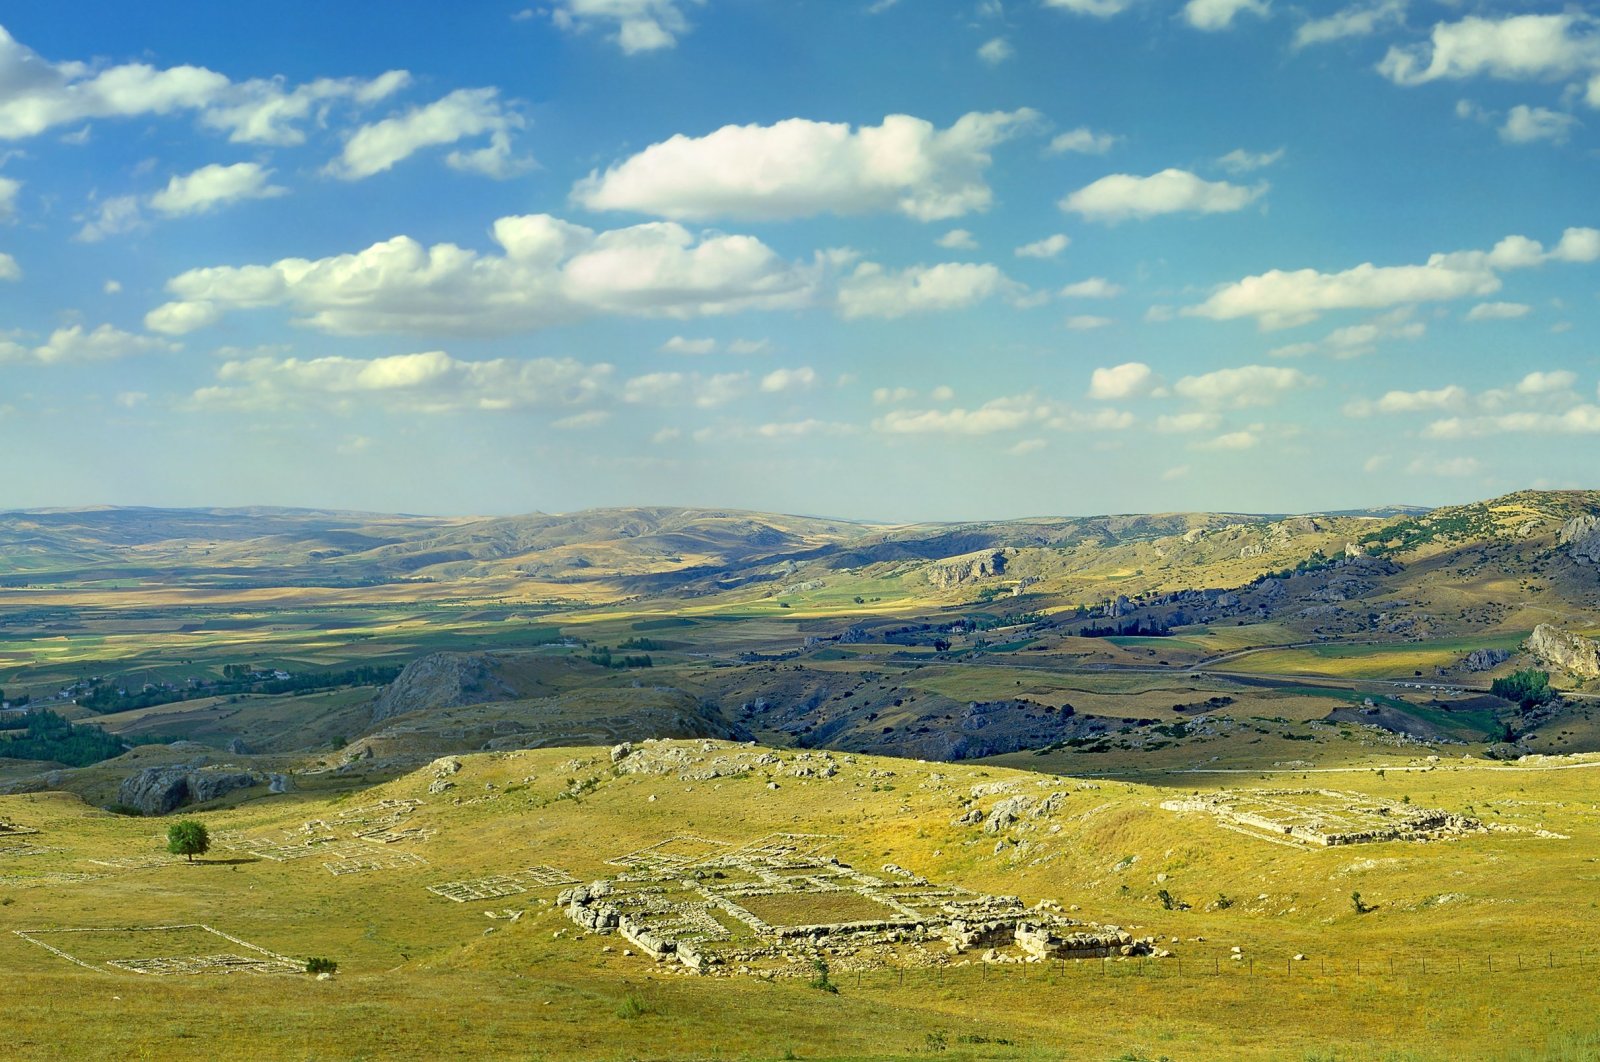 Captured from above, this aerial view offers a glimpse of Çorum province, which boasts historical significance as the capital of the ancient Hittite Empire in northern Türkiye. (Shutterstock Photo)